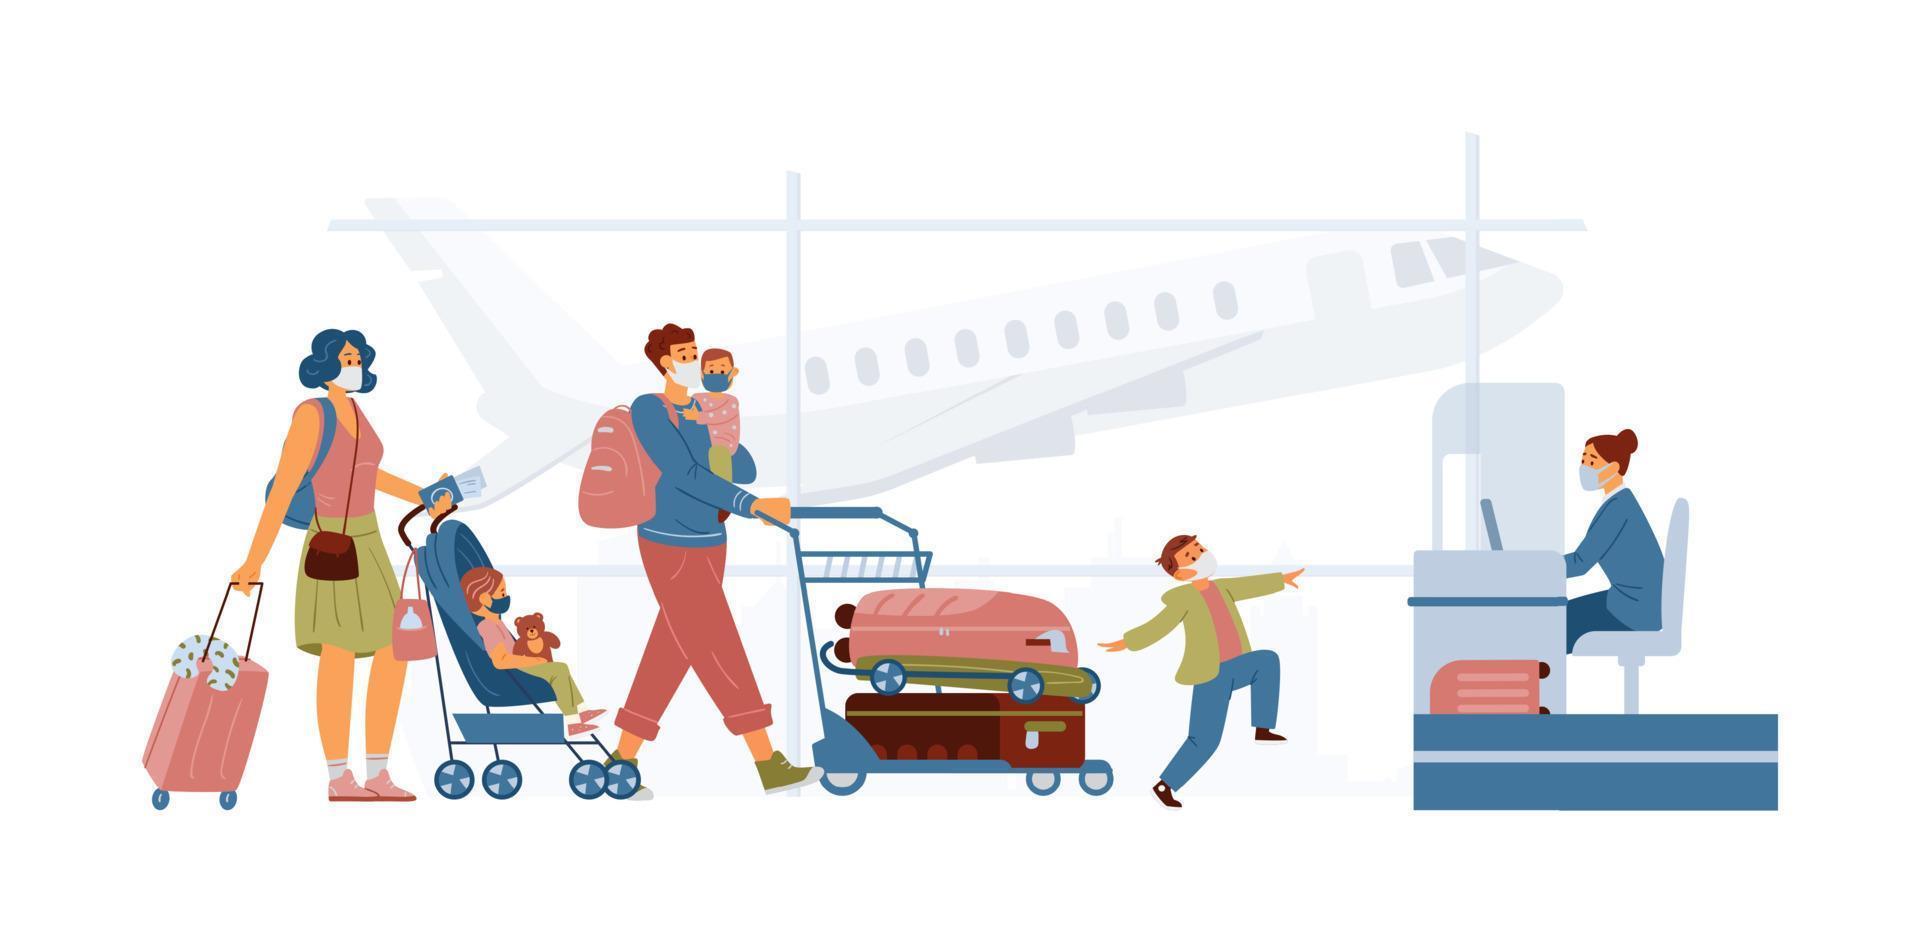 Family Wearing Protective Masks In Airport Near Check In Stand. Mother With Baby Stroller, Father Holding Child With Cart With Lugguage. Travel During Pandemic Concept. vector